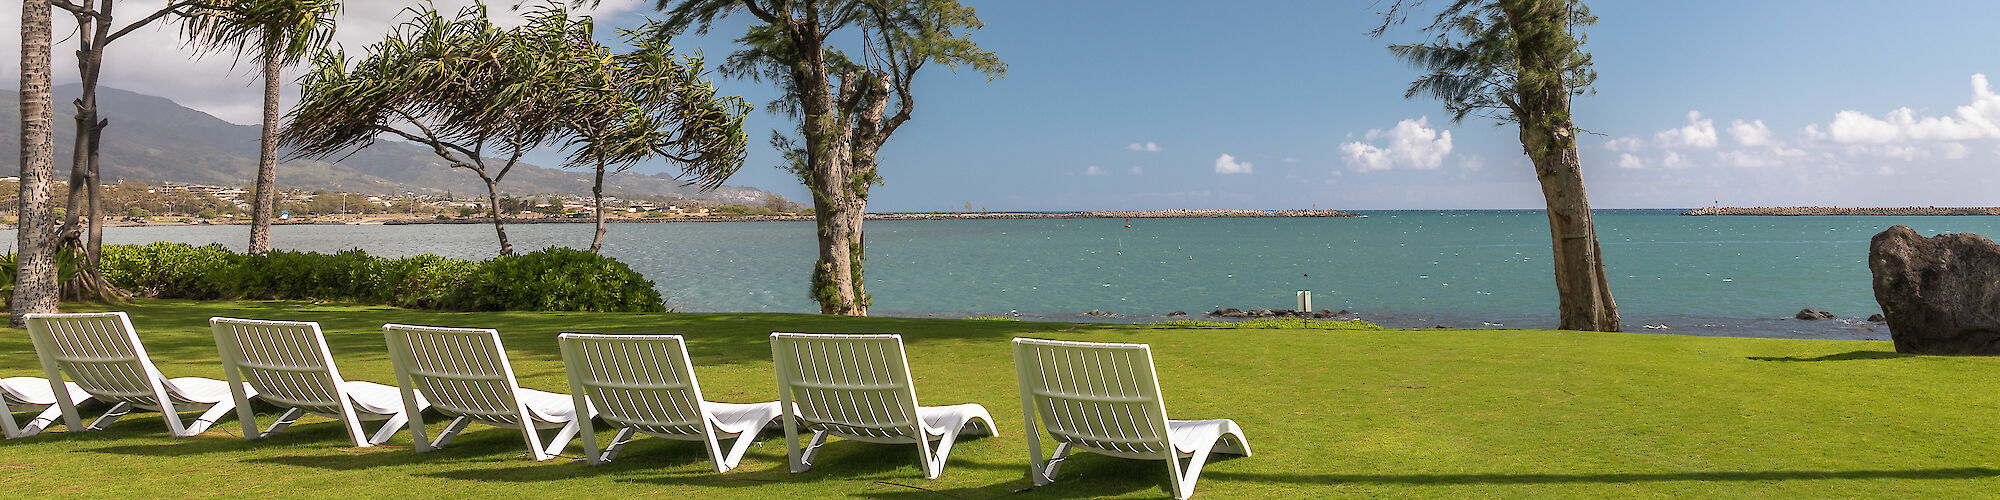 The image shows a row of white lounge chairs on a green lawn, overlooking a scenic ocean view with trees and distant mountains.